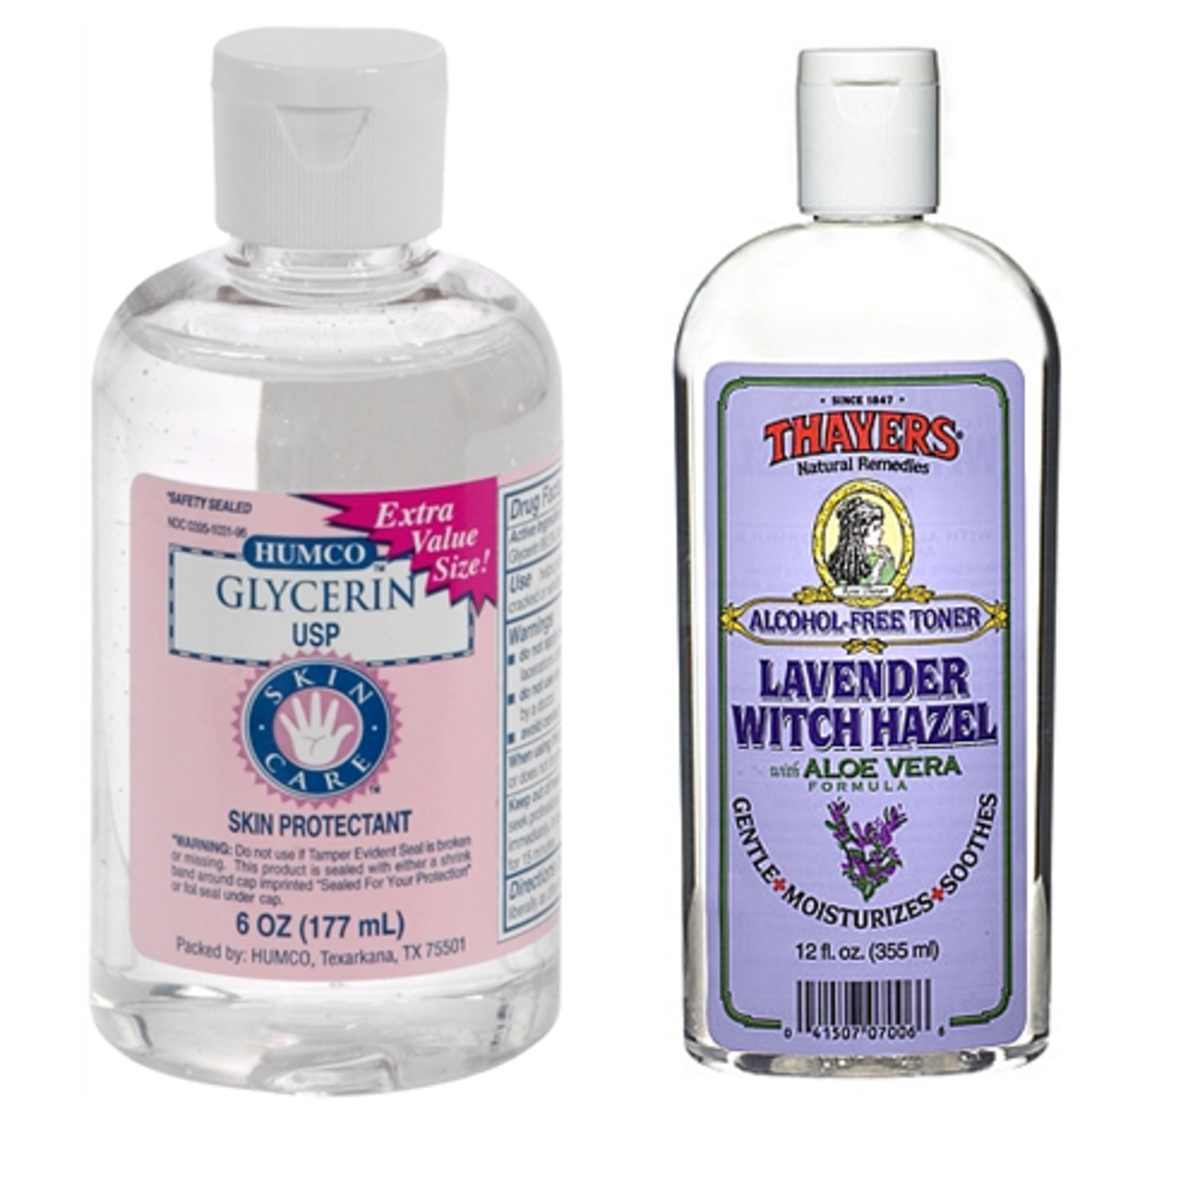 Homeopathic Topical Psoriasis Remedy - Witch Hazel and Glycerin USP